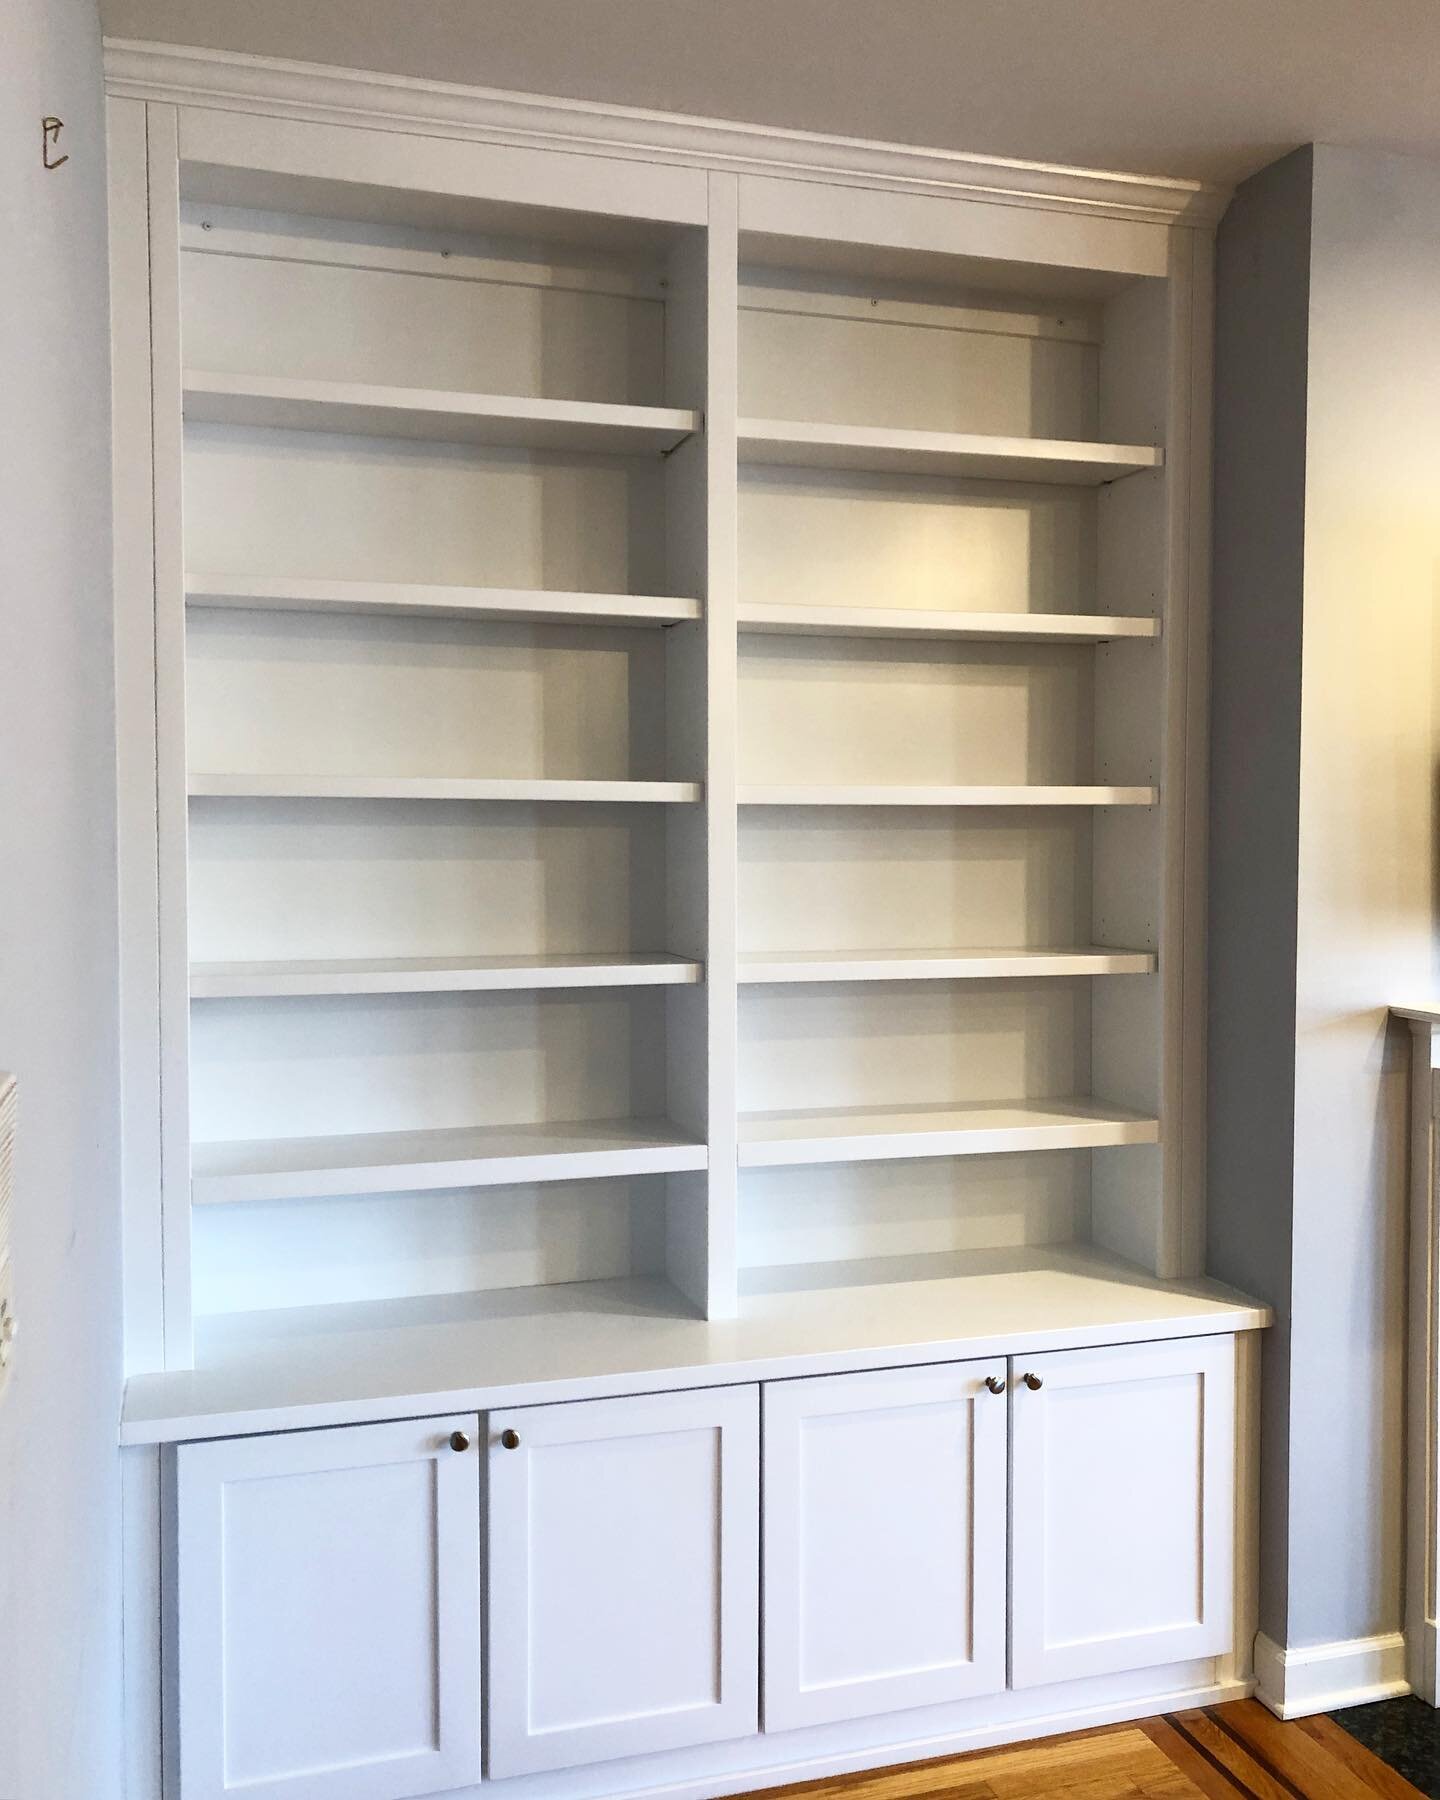 After hours and hours of shoveling, we could all use some visual relaxation therapy. The clean lines and endless storage &amp; decor possibilities of this built-in hutch will do just fine. 

#builtnotbought #keepcraftalive #custommade #customcarpentr